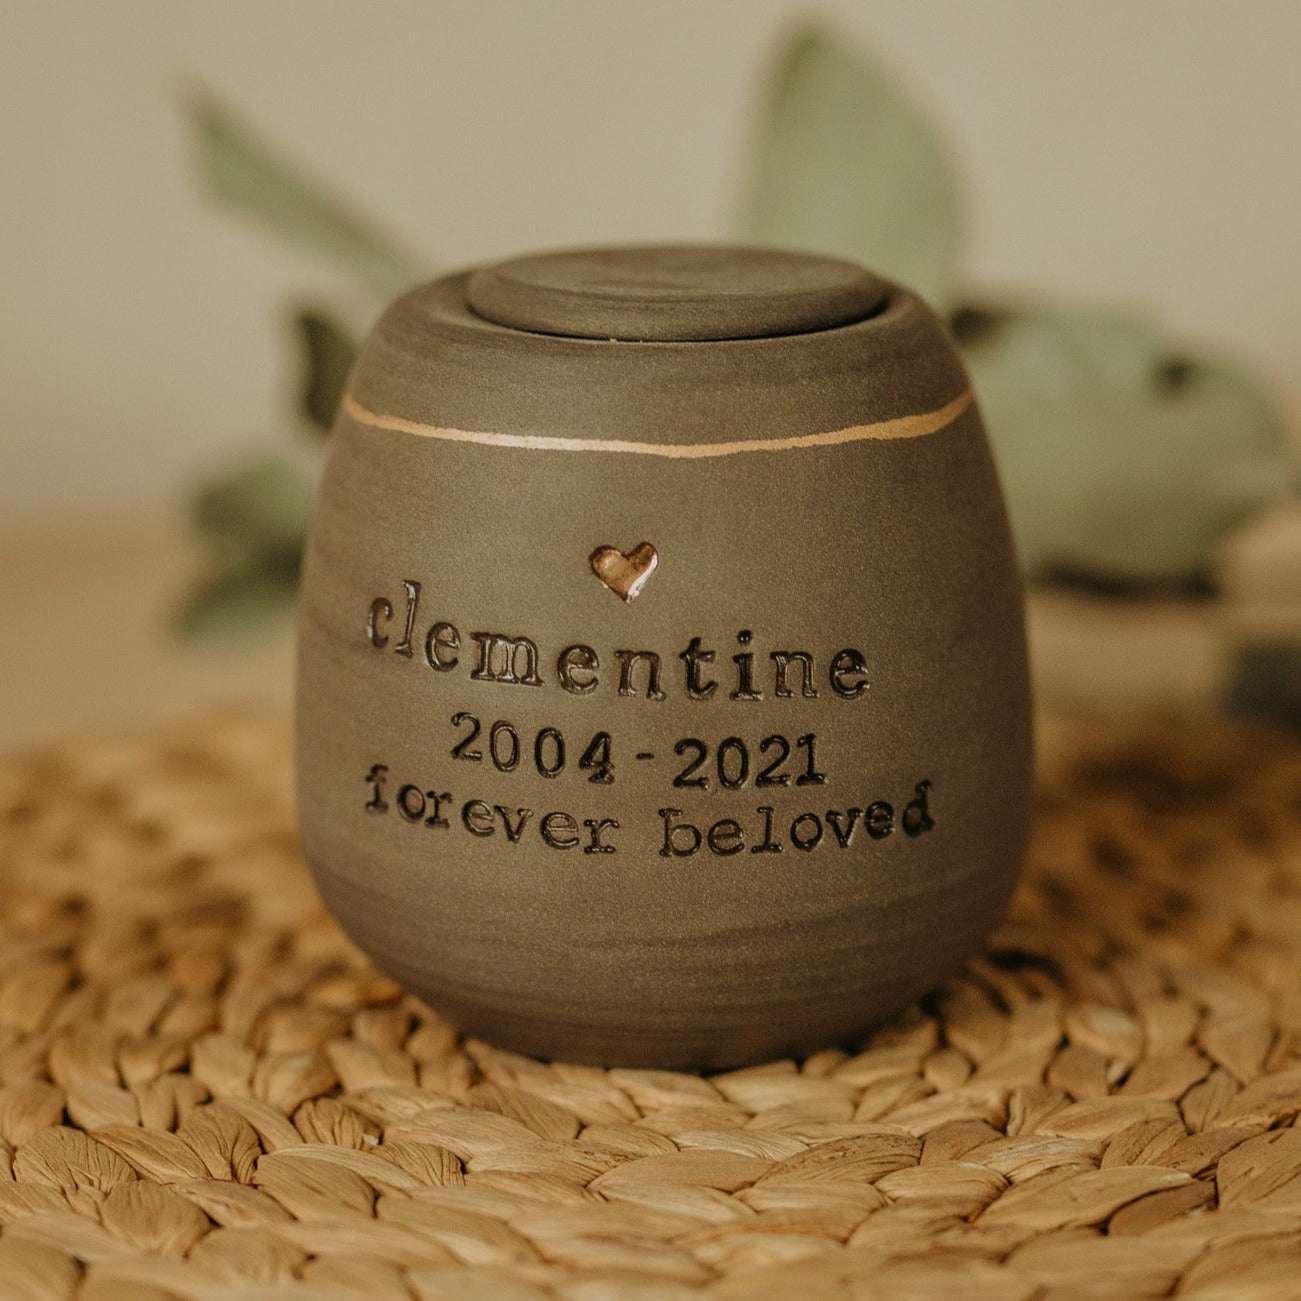 Personalized dog memorial urn - artisan-crafted - lasting tribute for your beloved companion.